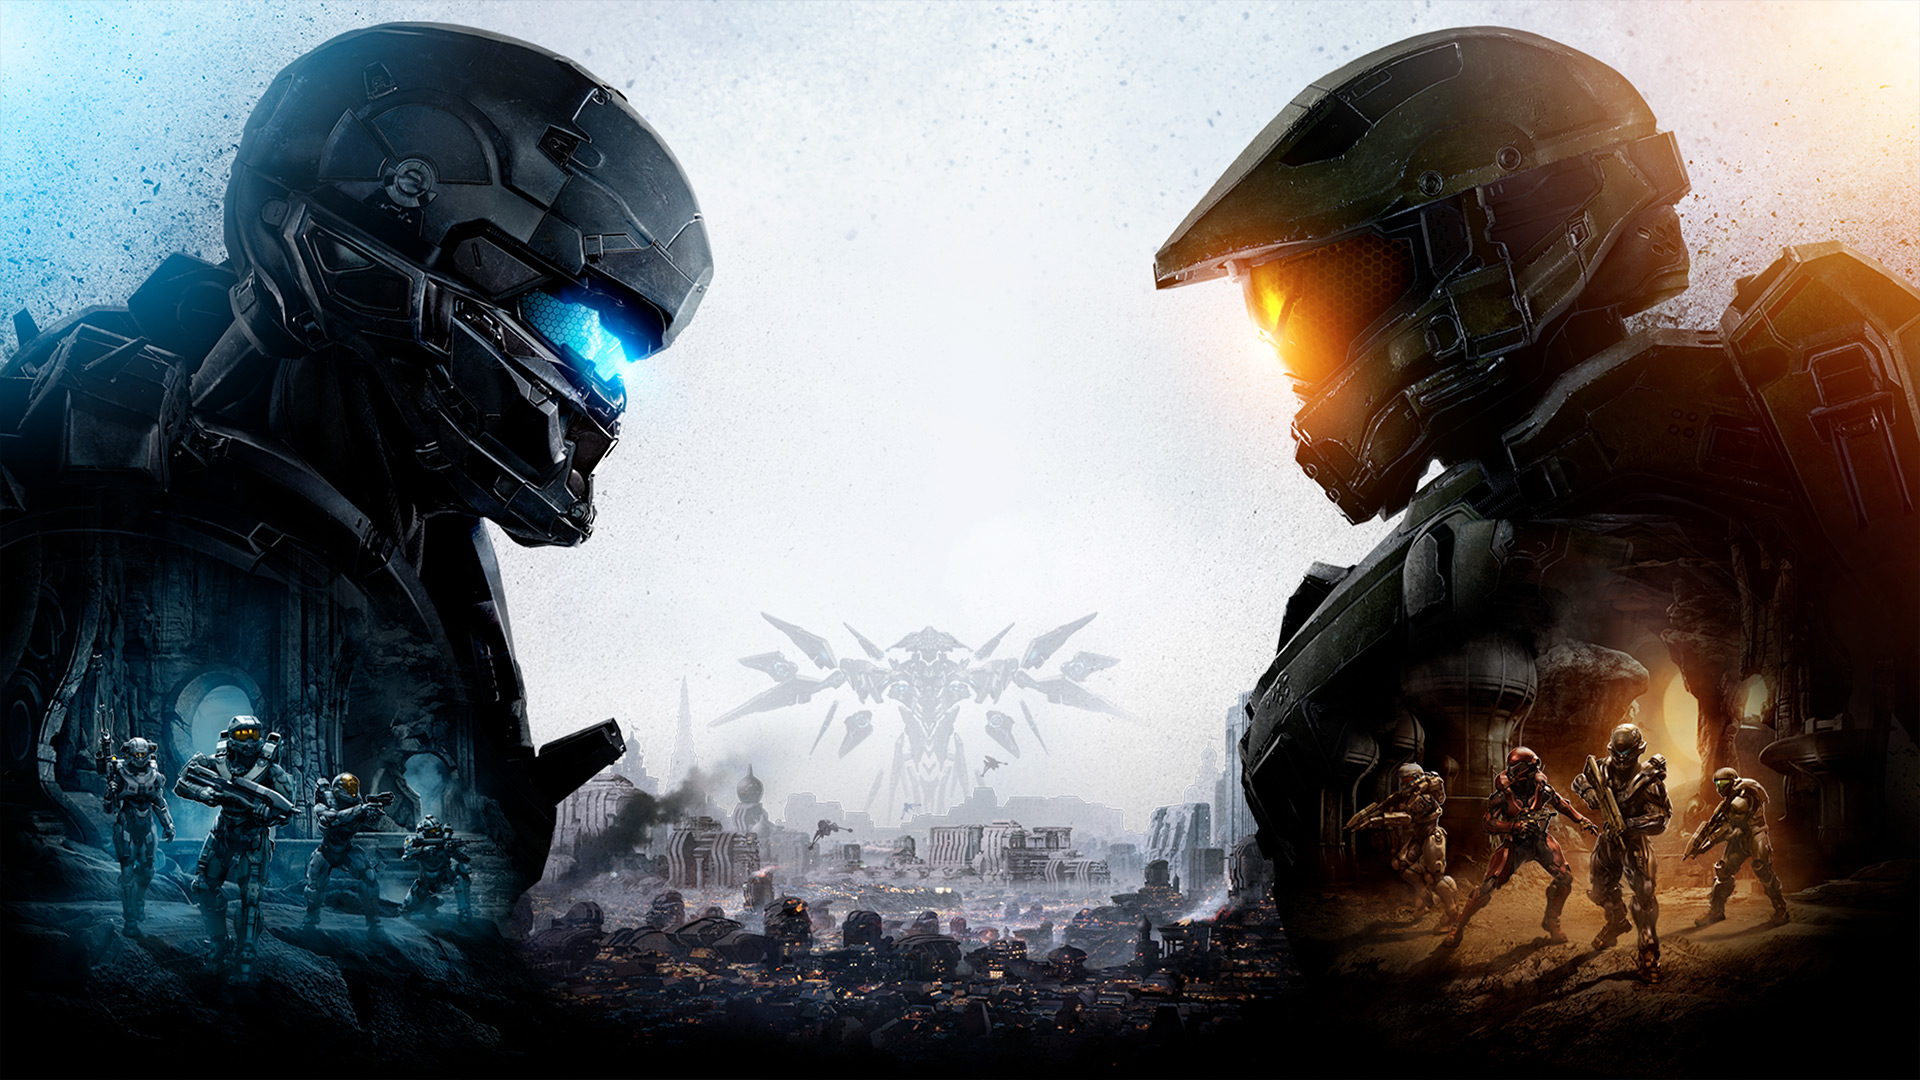 Halo games in order: Halo 5 Guardians art with Master Chief staring at Locke.